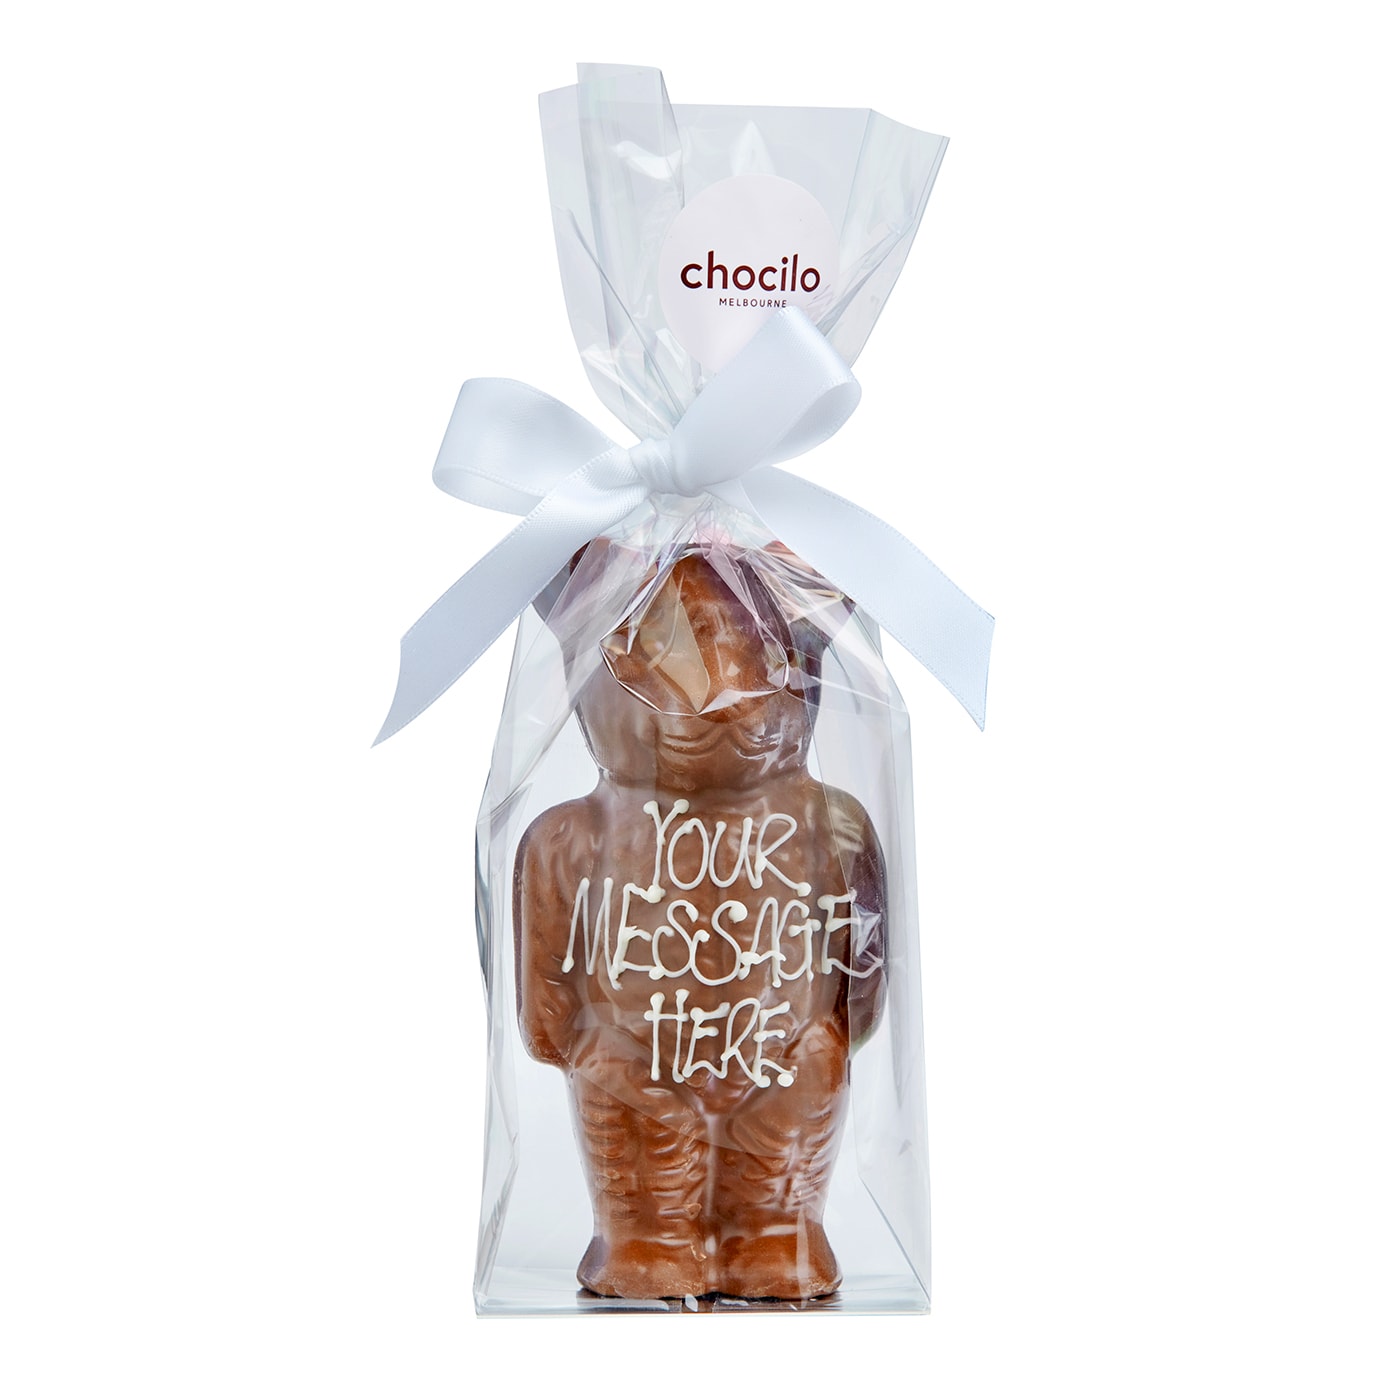 Chocilo Melbourne Personalised Chocolate Bear gift wrapped.